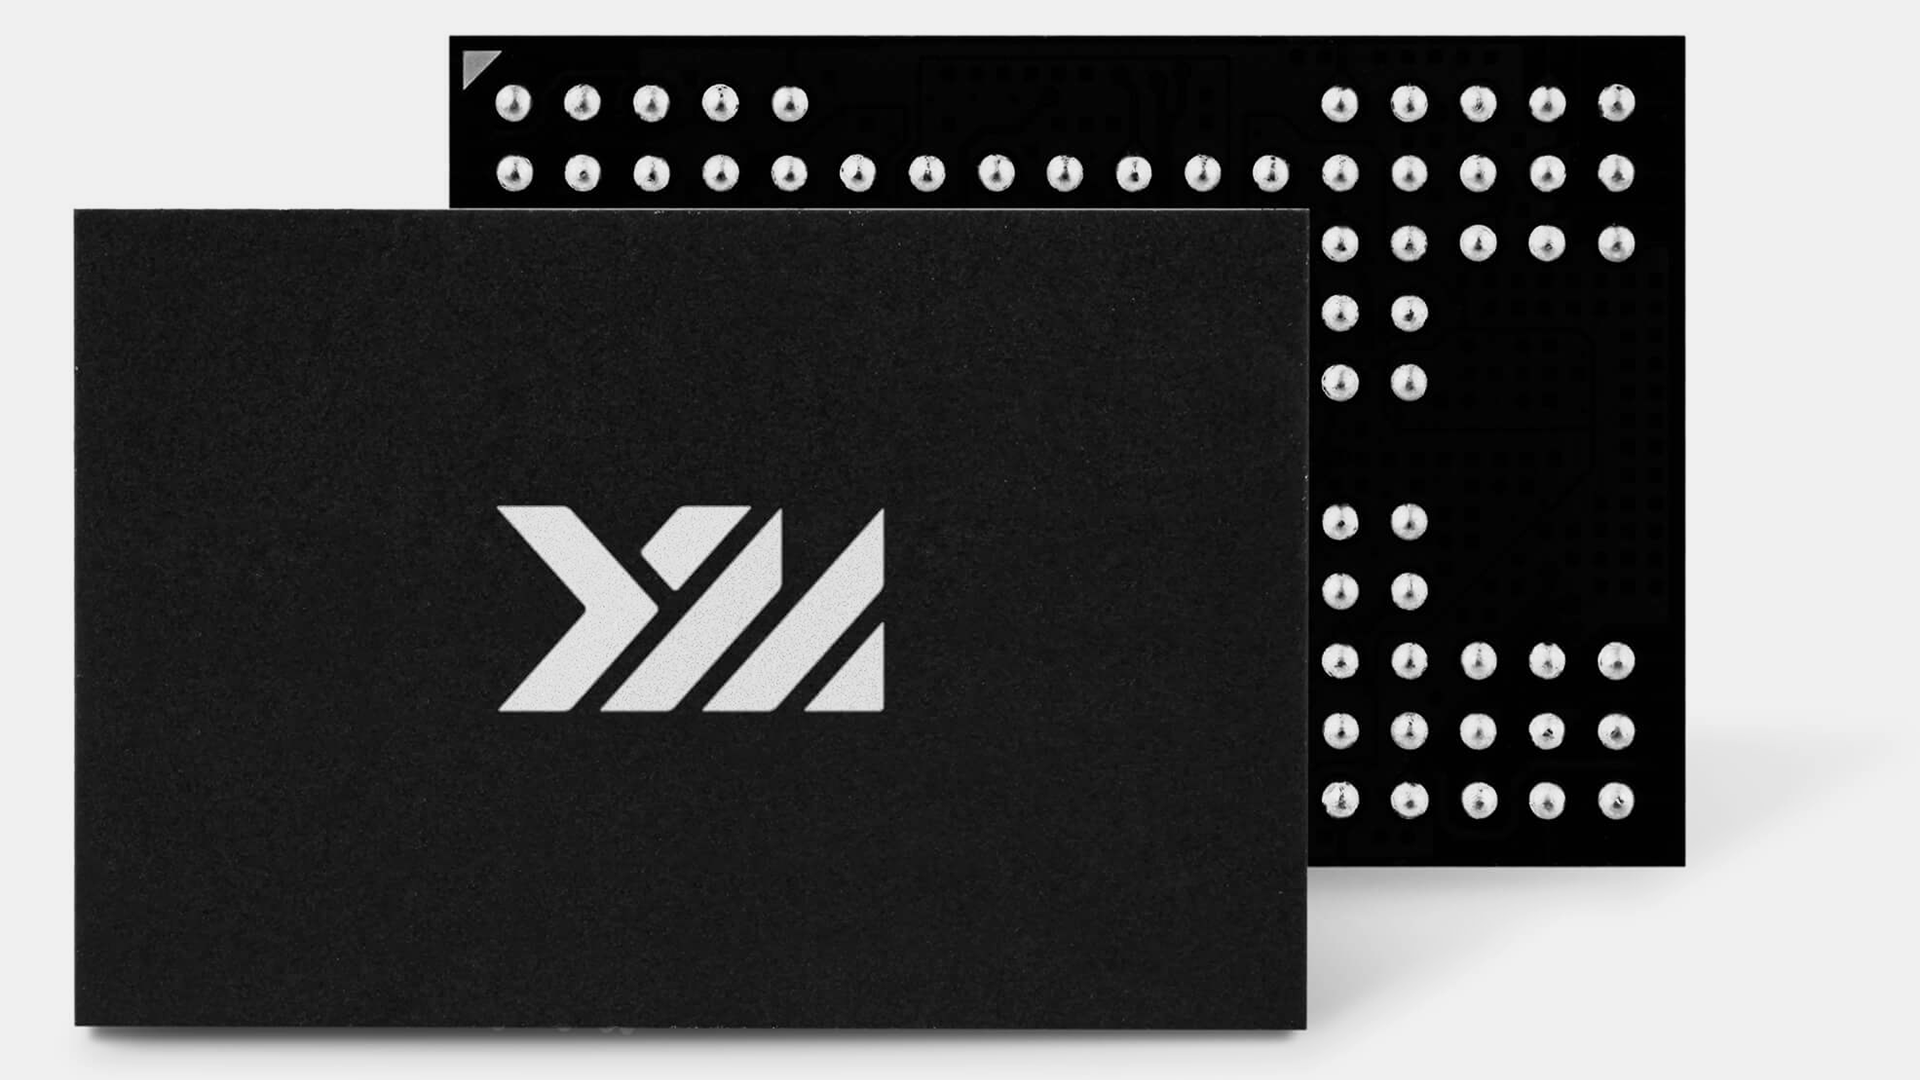 YMTC's New In-House Controllers to Power PCIe 4.0 SSDs TiwuGCXfbjb7oStPFPAwUY